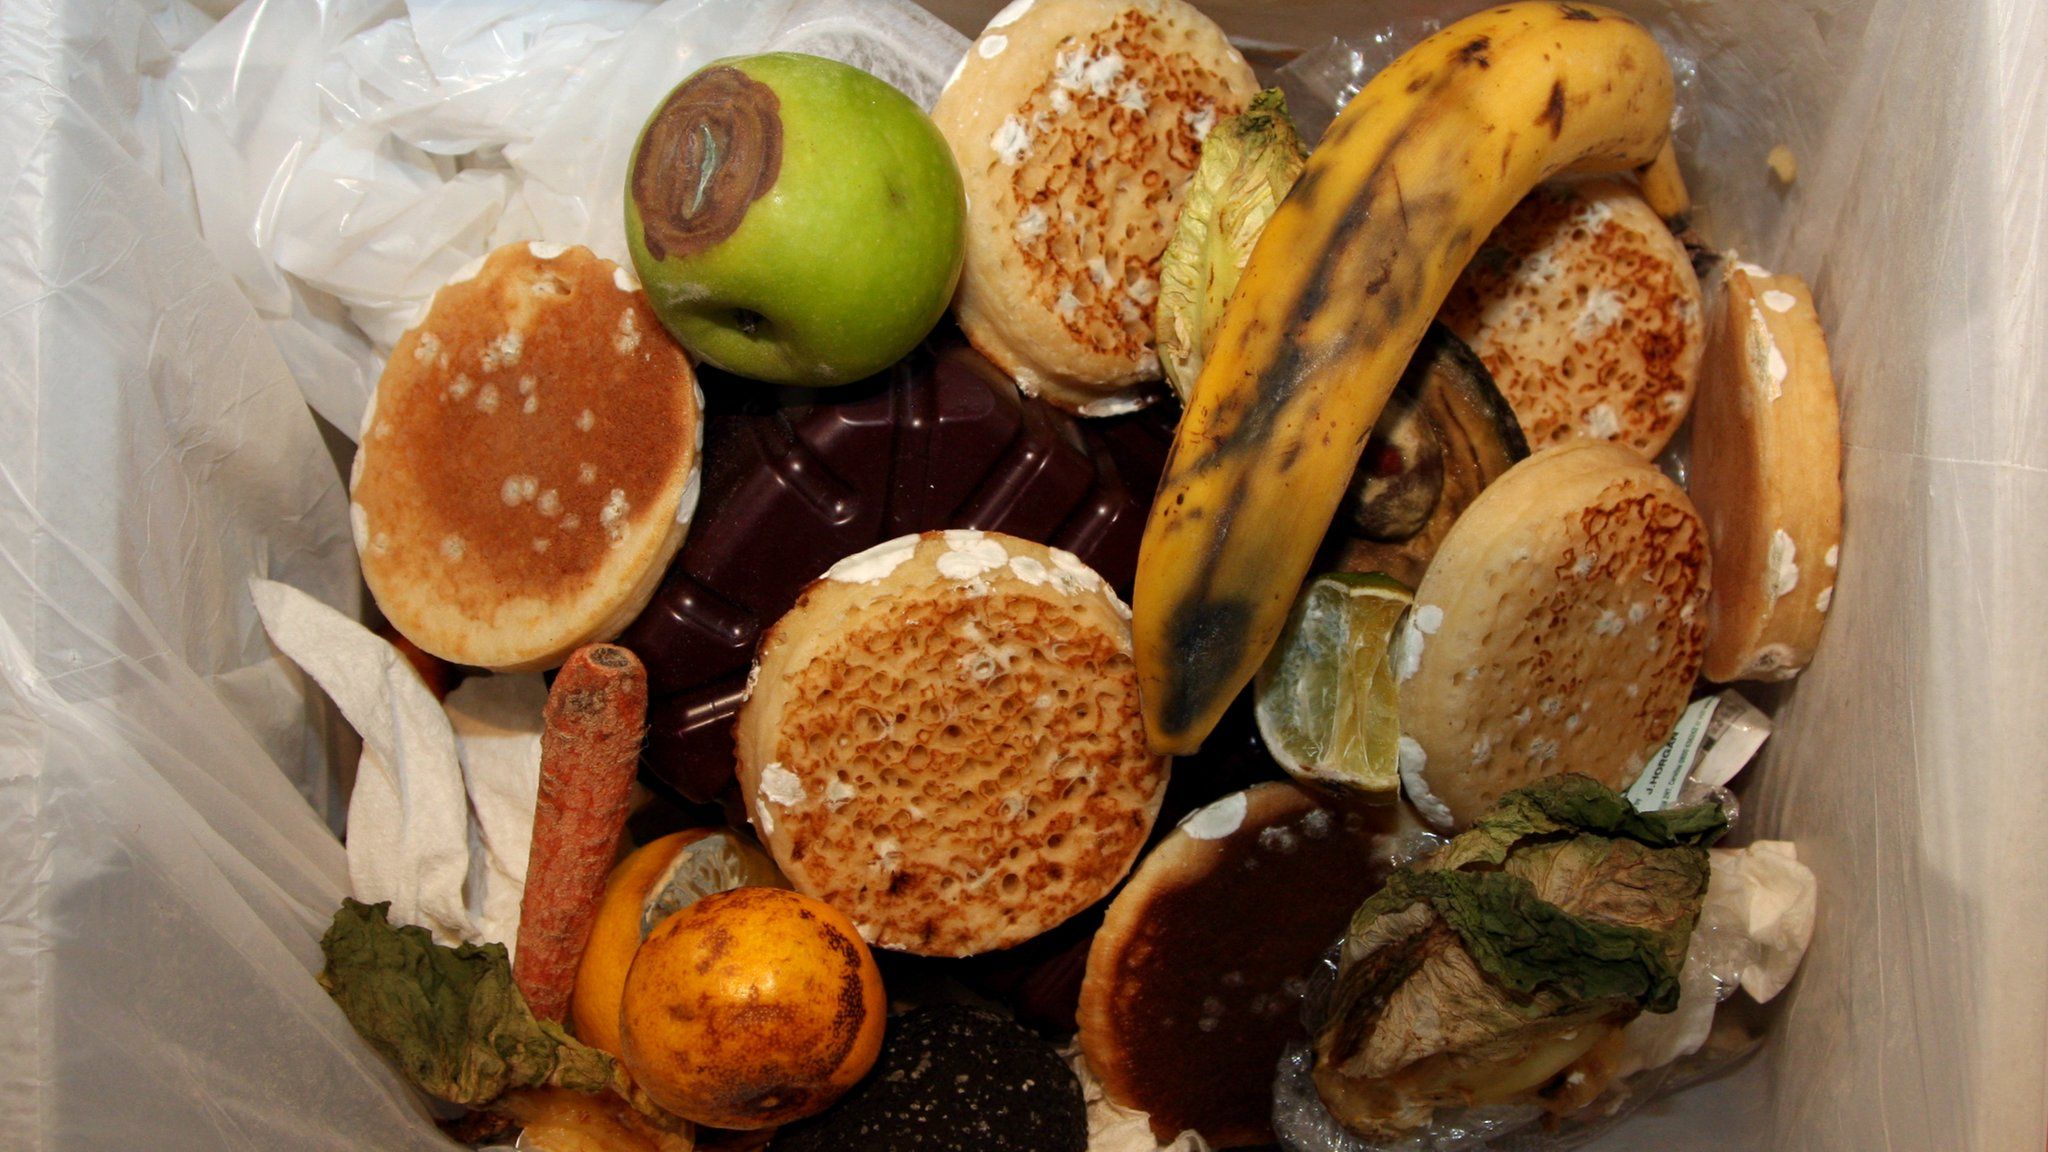 Food in a waste bin (Image: BBC)